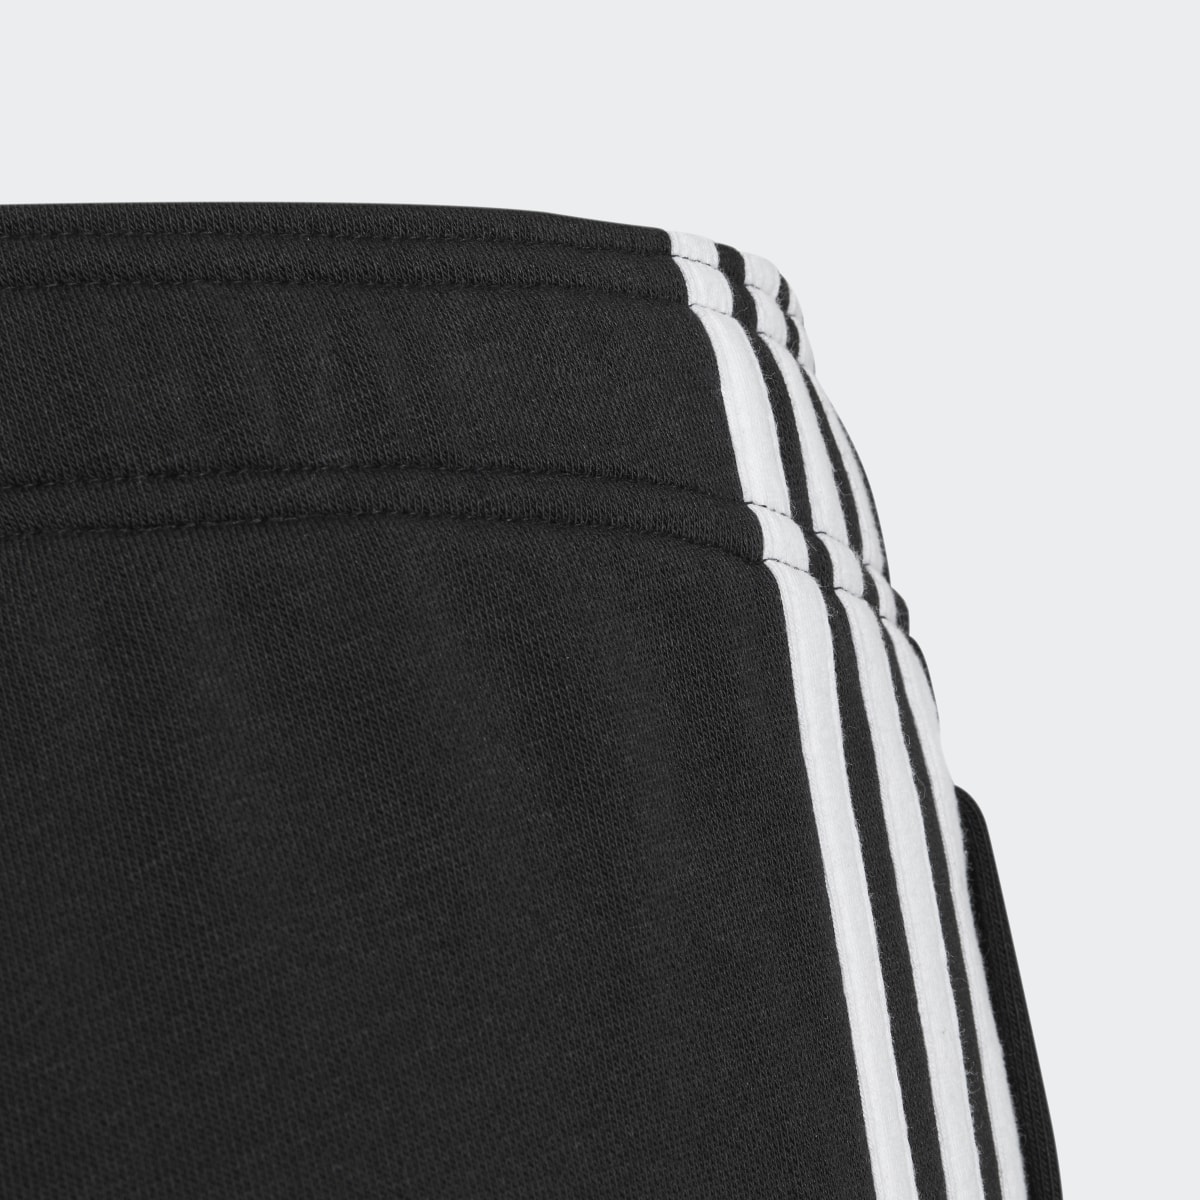 Adidas Germany Tracksuit Bottoms. 5